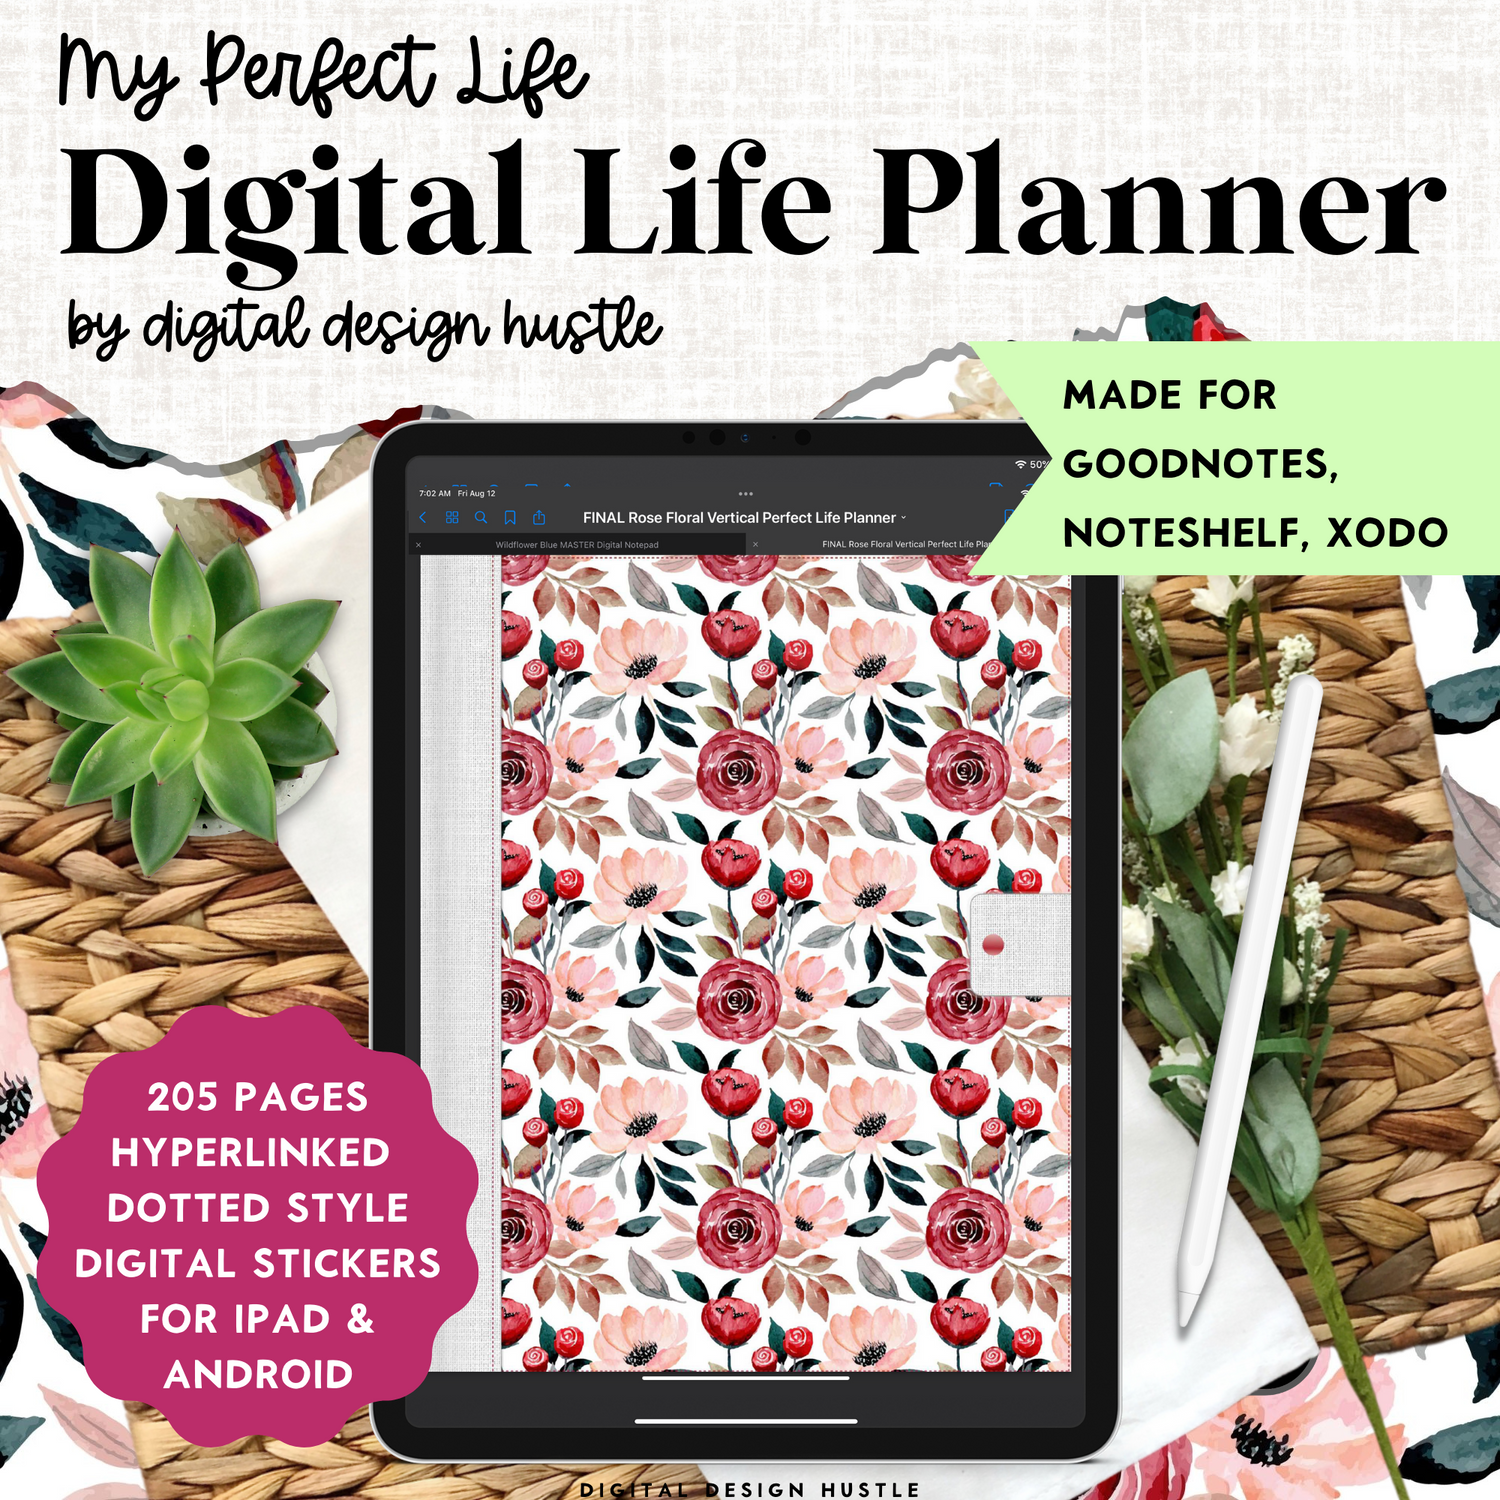 Plan your perfect day with this Floral Rose Digital Planner With Digital Stickers. This undated portrait-style digital planner has all the tools you need to get organized in your life. This All In One Digital Lifestyle Planner will help you focus on your yearly, monthly, weekly &amp; daily plans as well as goals, finances, lifestyle, wellness, business, mindset and more.